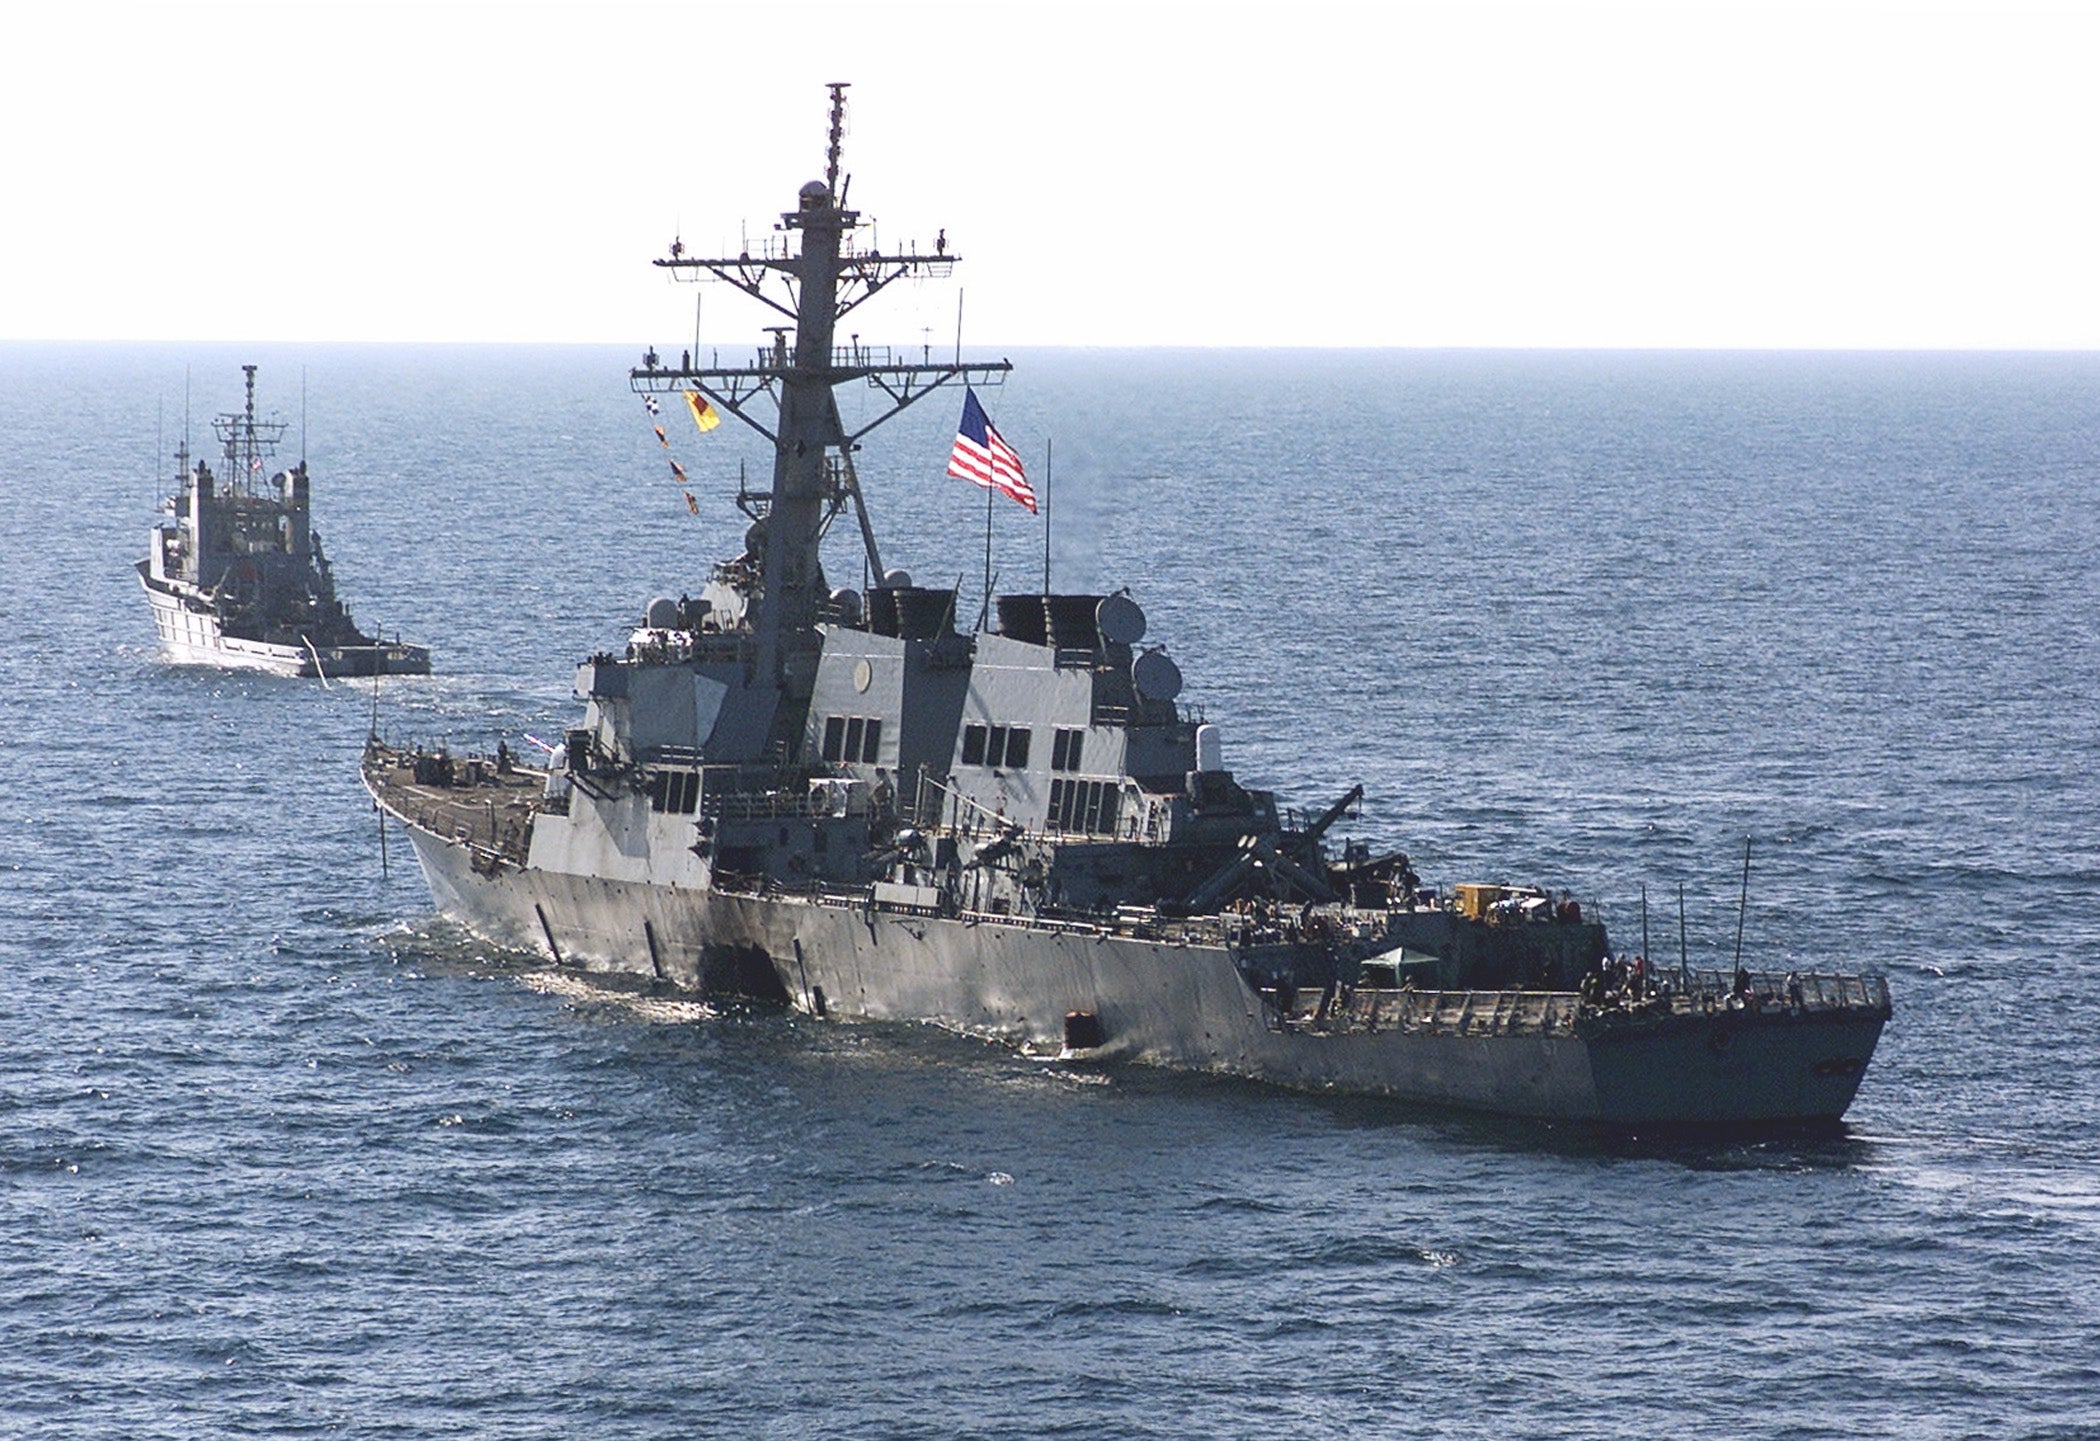 20 years after the attack on the USS Cole, memories of heroism and loss